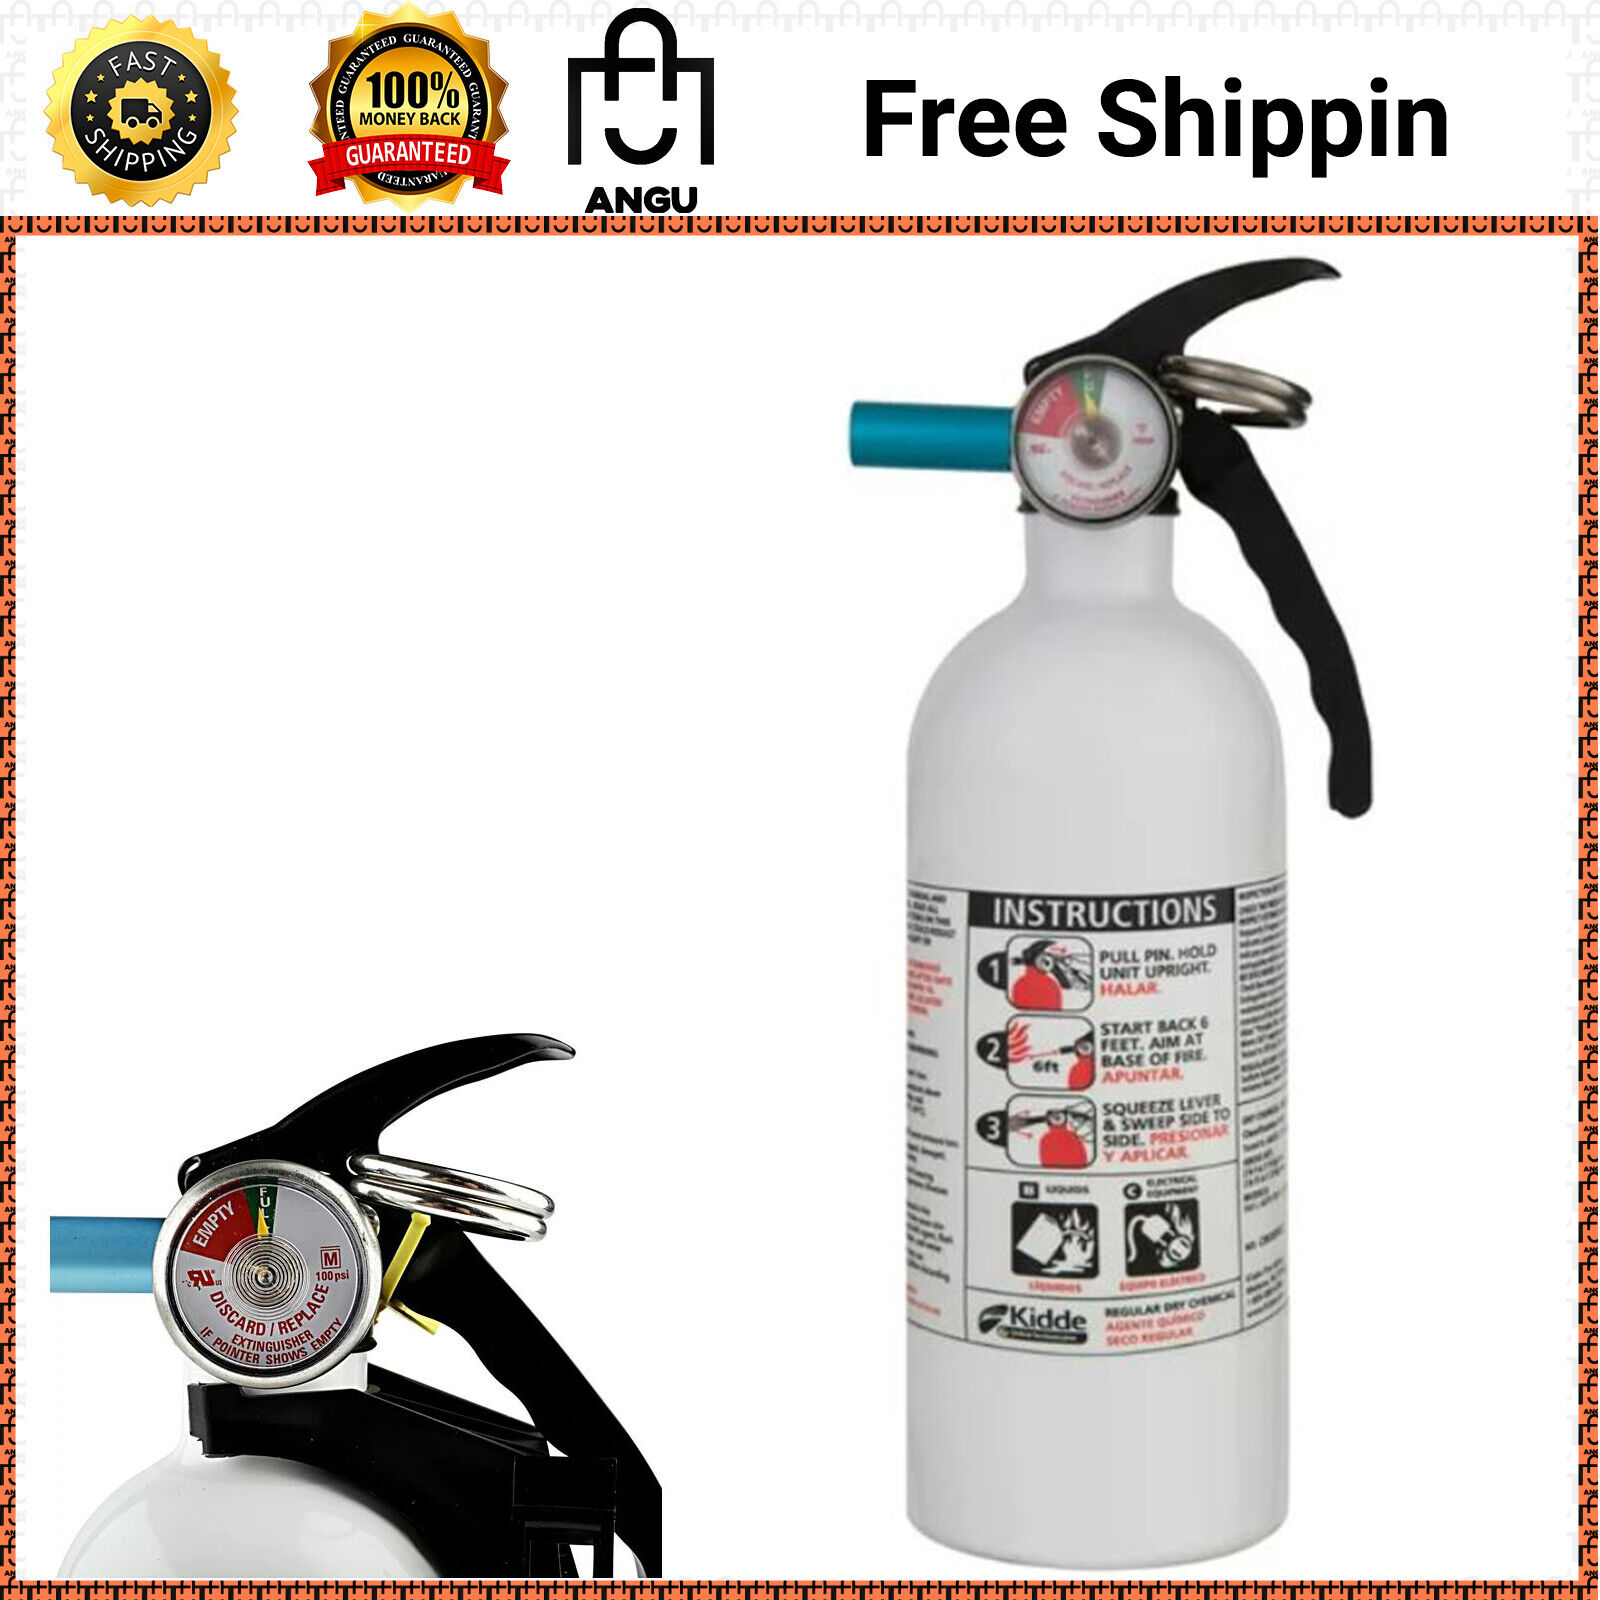 Kidde 5BC Fire Extinguisher Home Boat Office Safety Emergency Fire Extinguisher